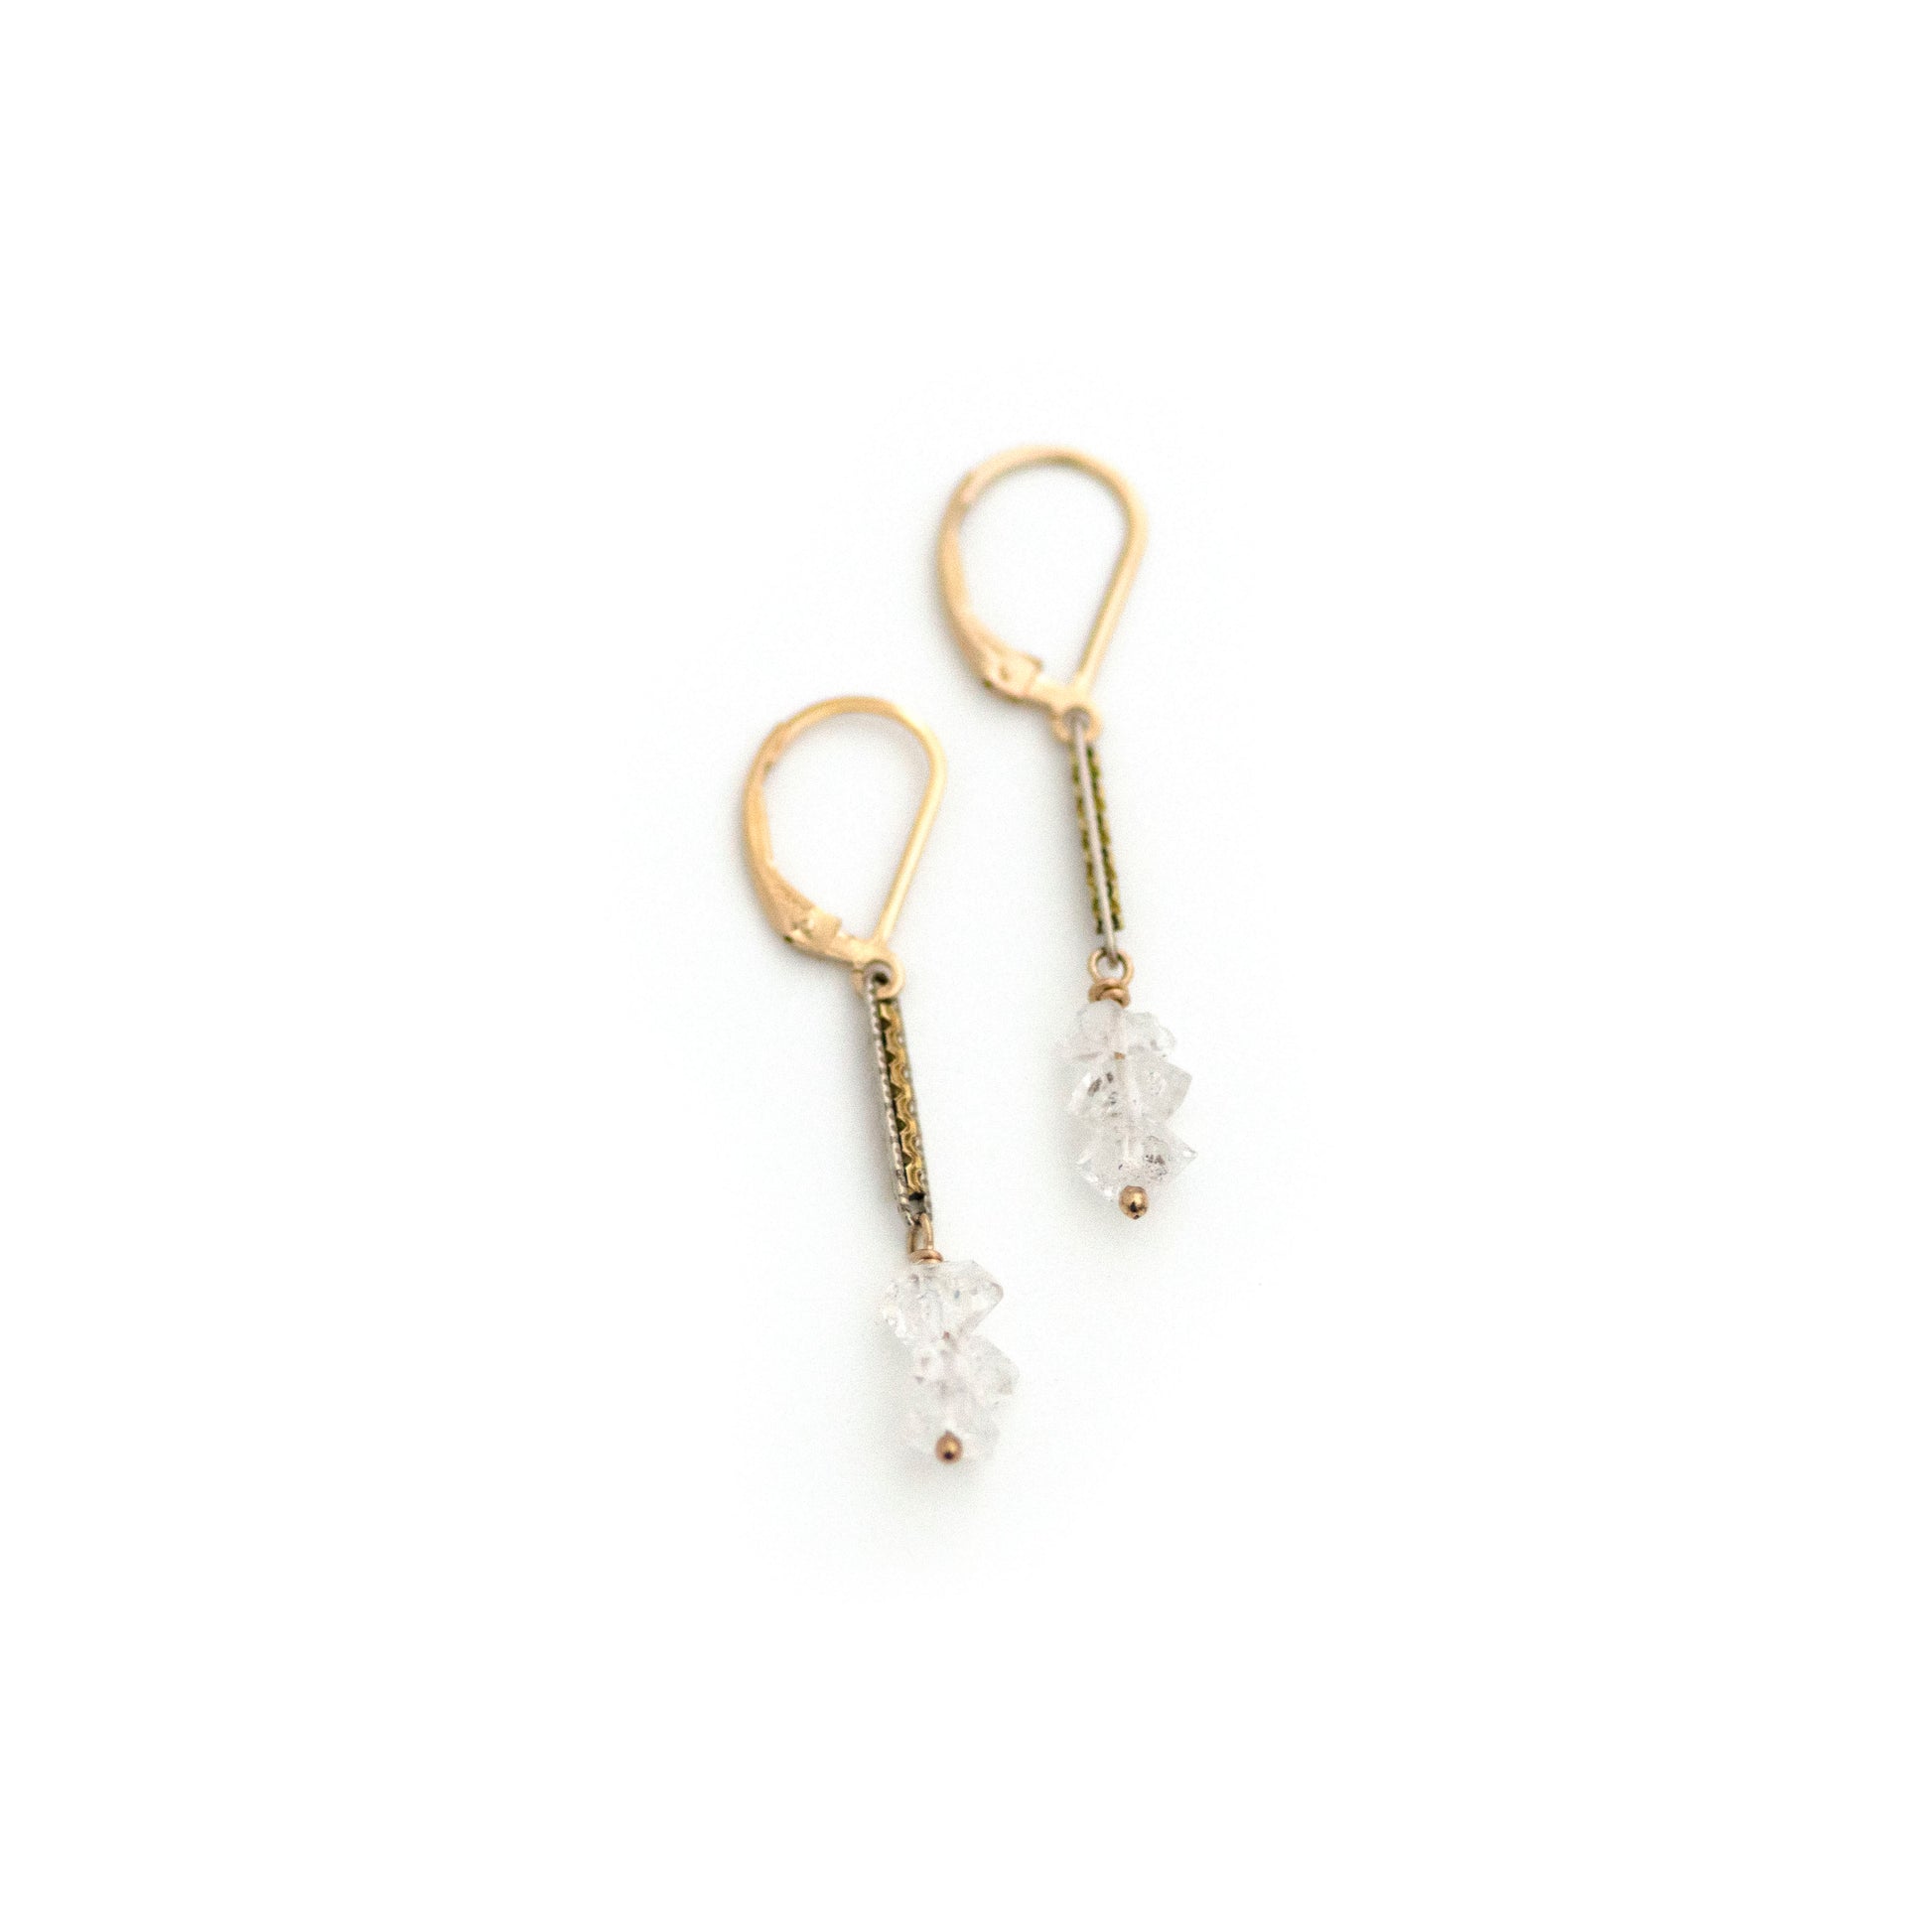 These one-of-a-kind conversion earrings are made up of:  Gold filled and silver tone Edwardian watch chain links from the early 1900s with hand tooled details. Herkimer diamonds.